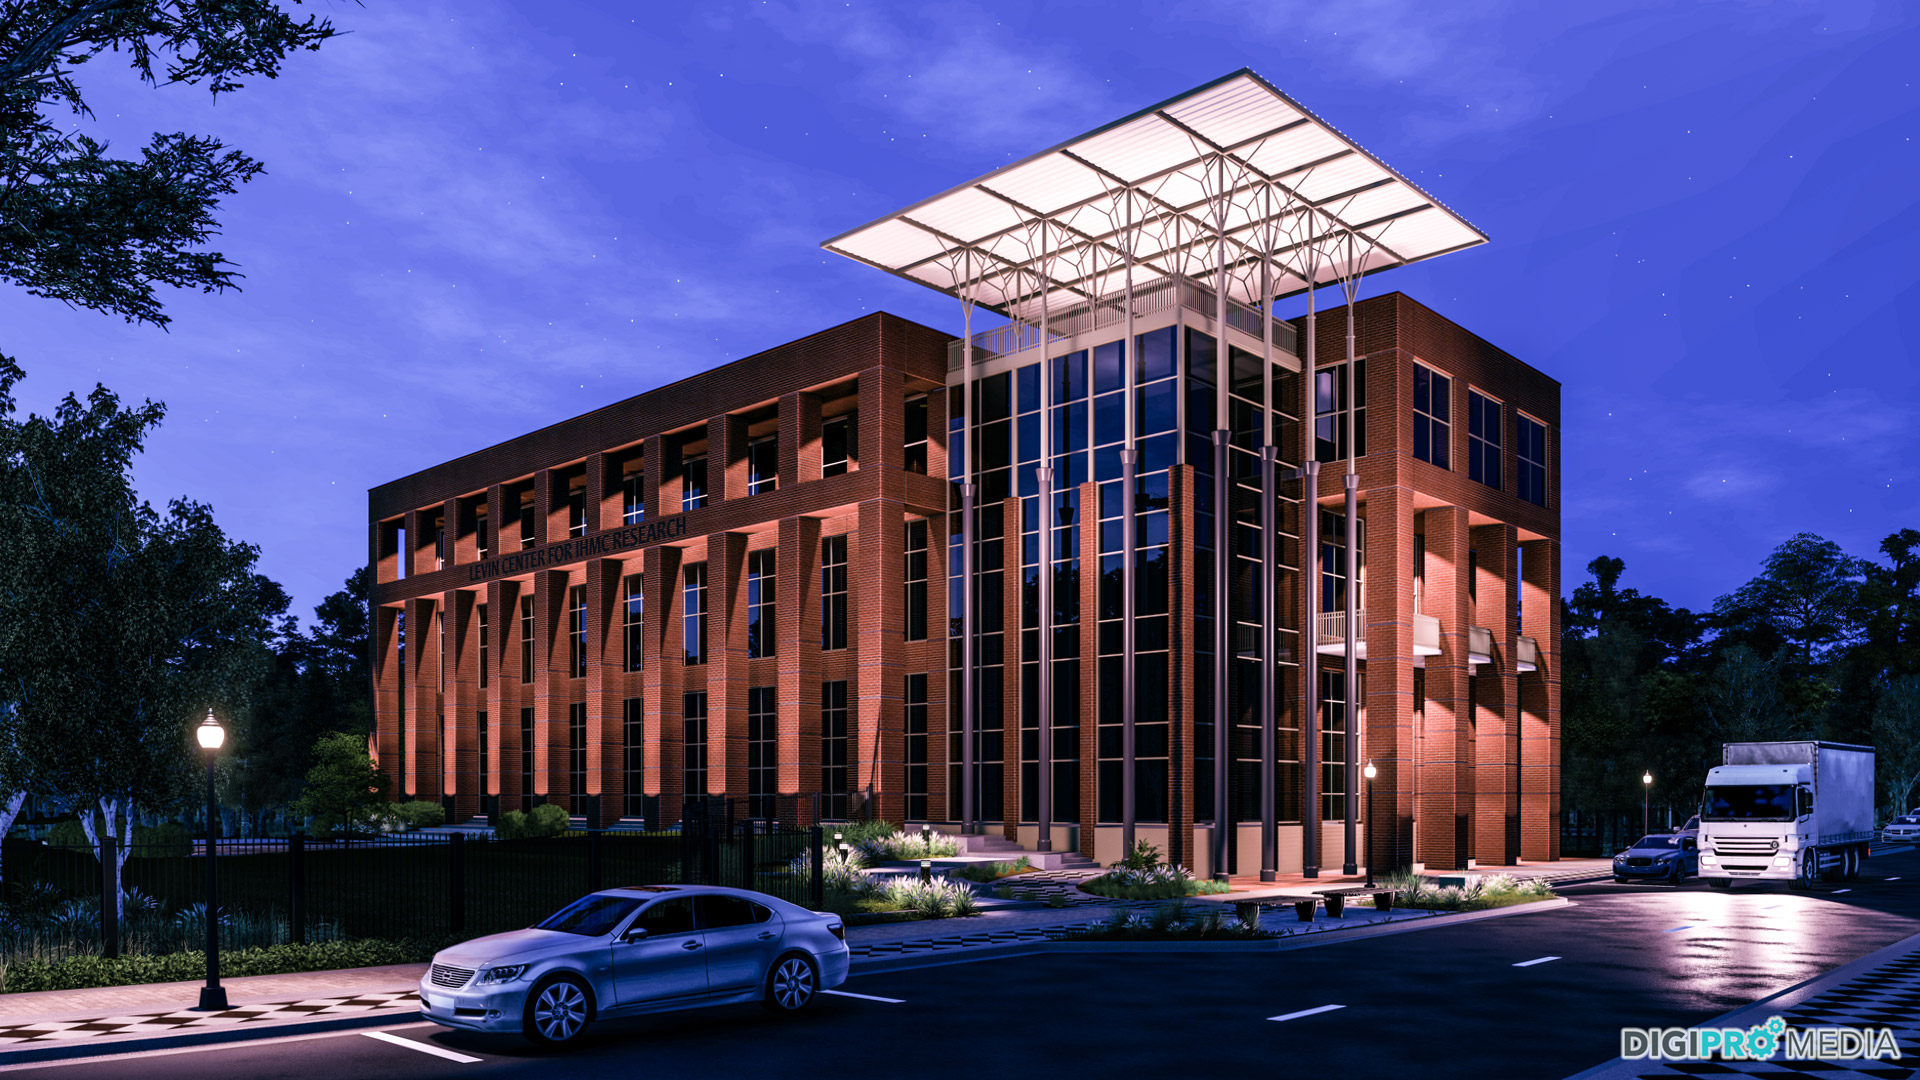 3d rendering of the Institute for Human and Machine Cognition at night.